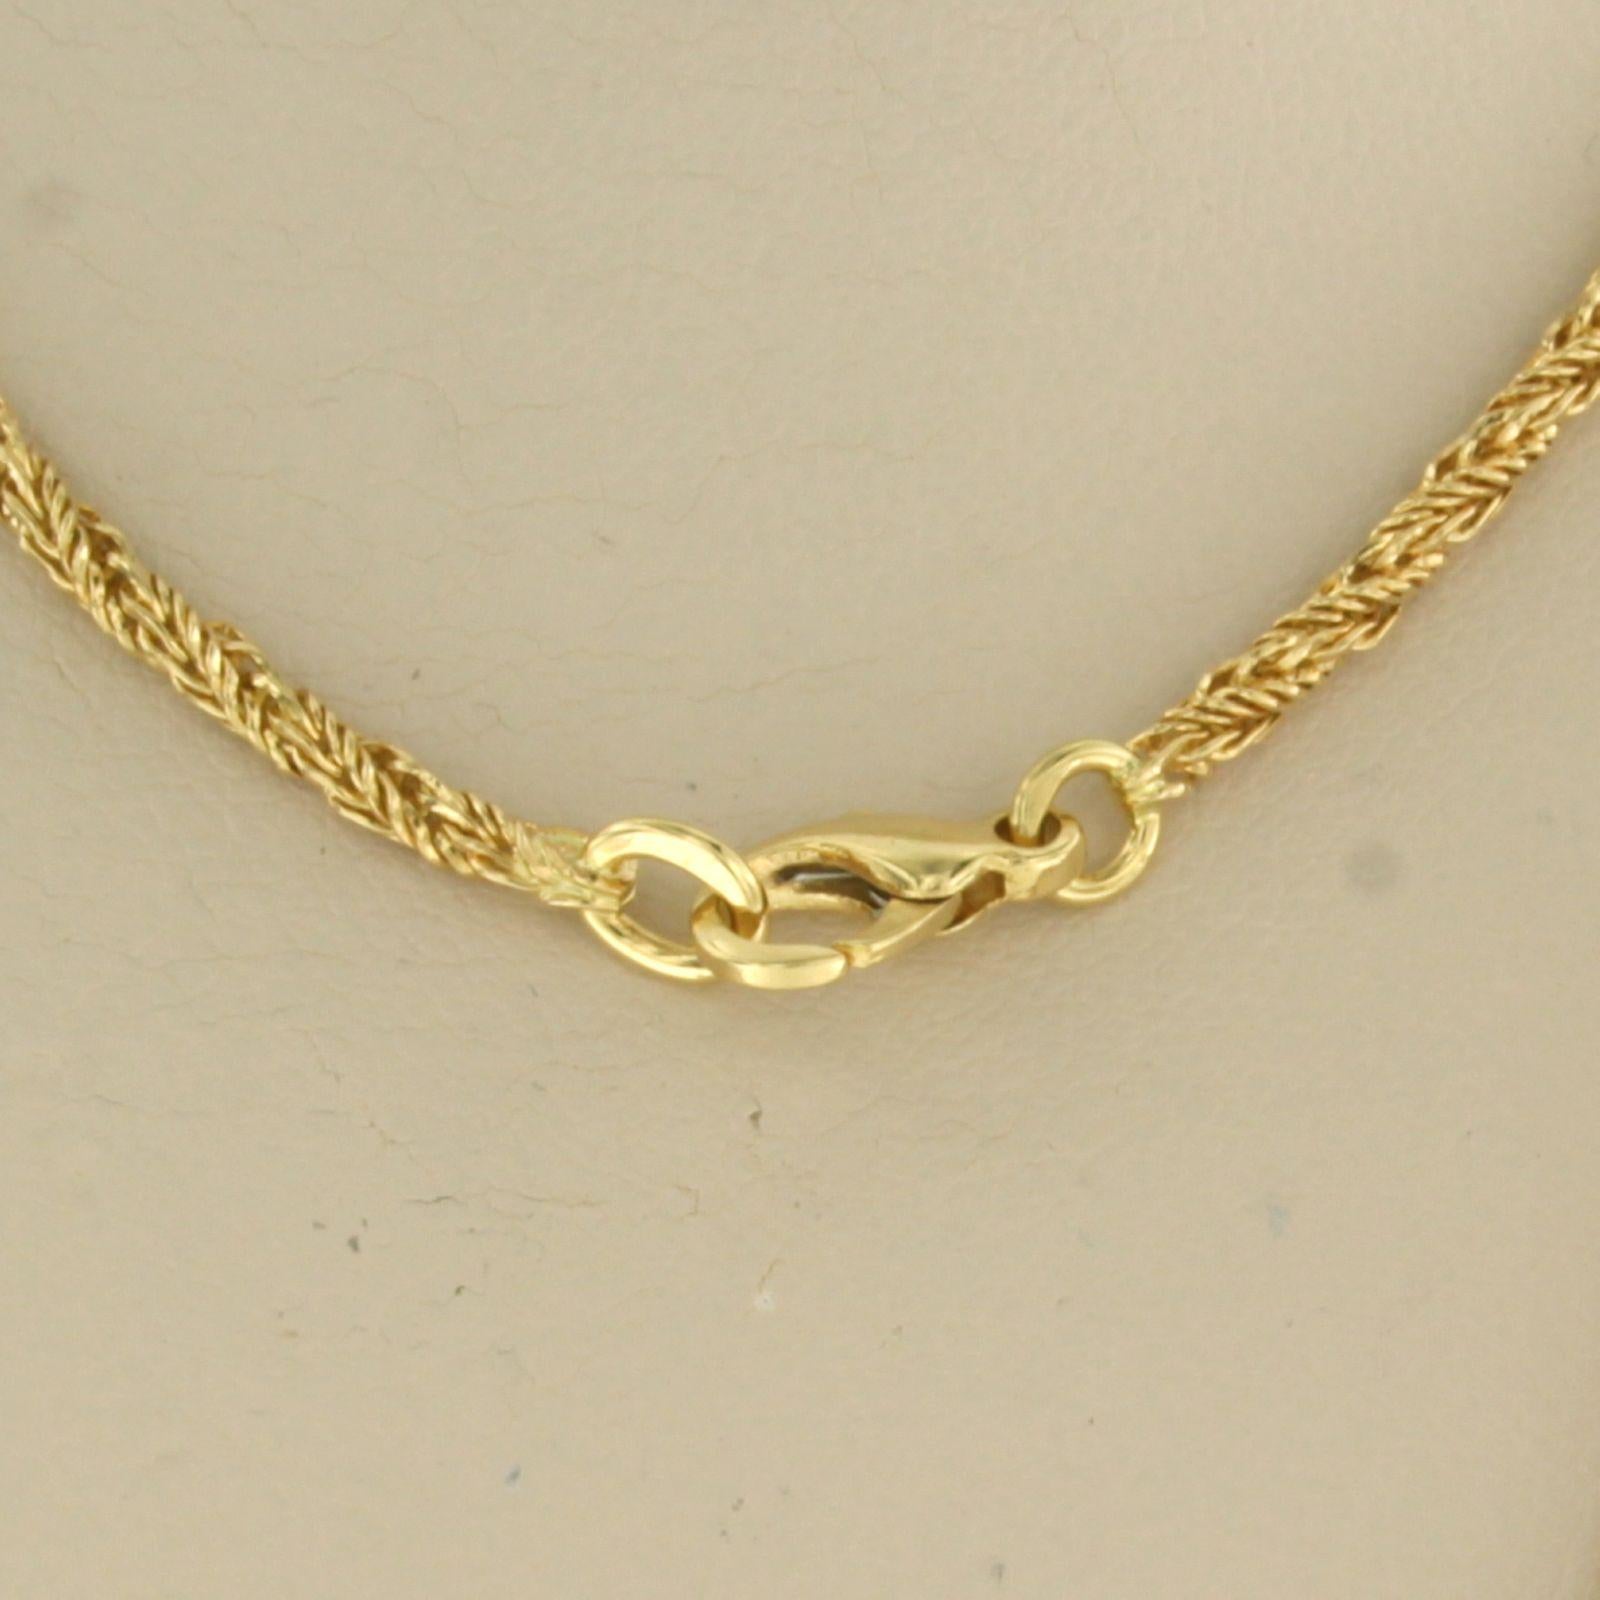 Necklace 18k yellow gold 45 cm long For Sale 1